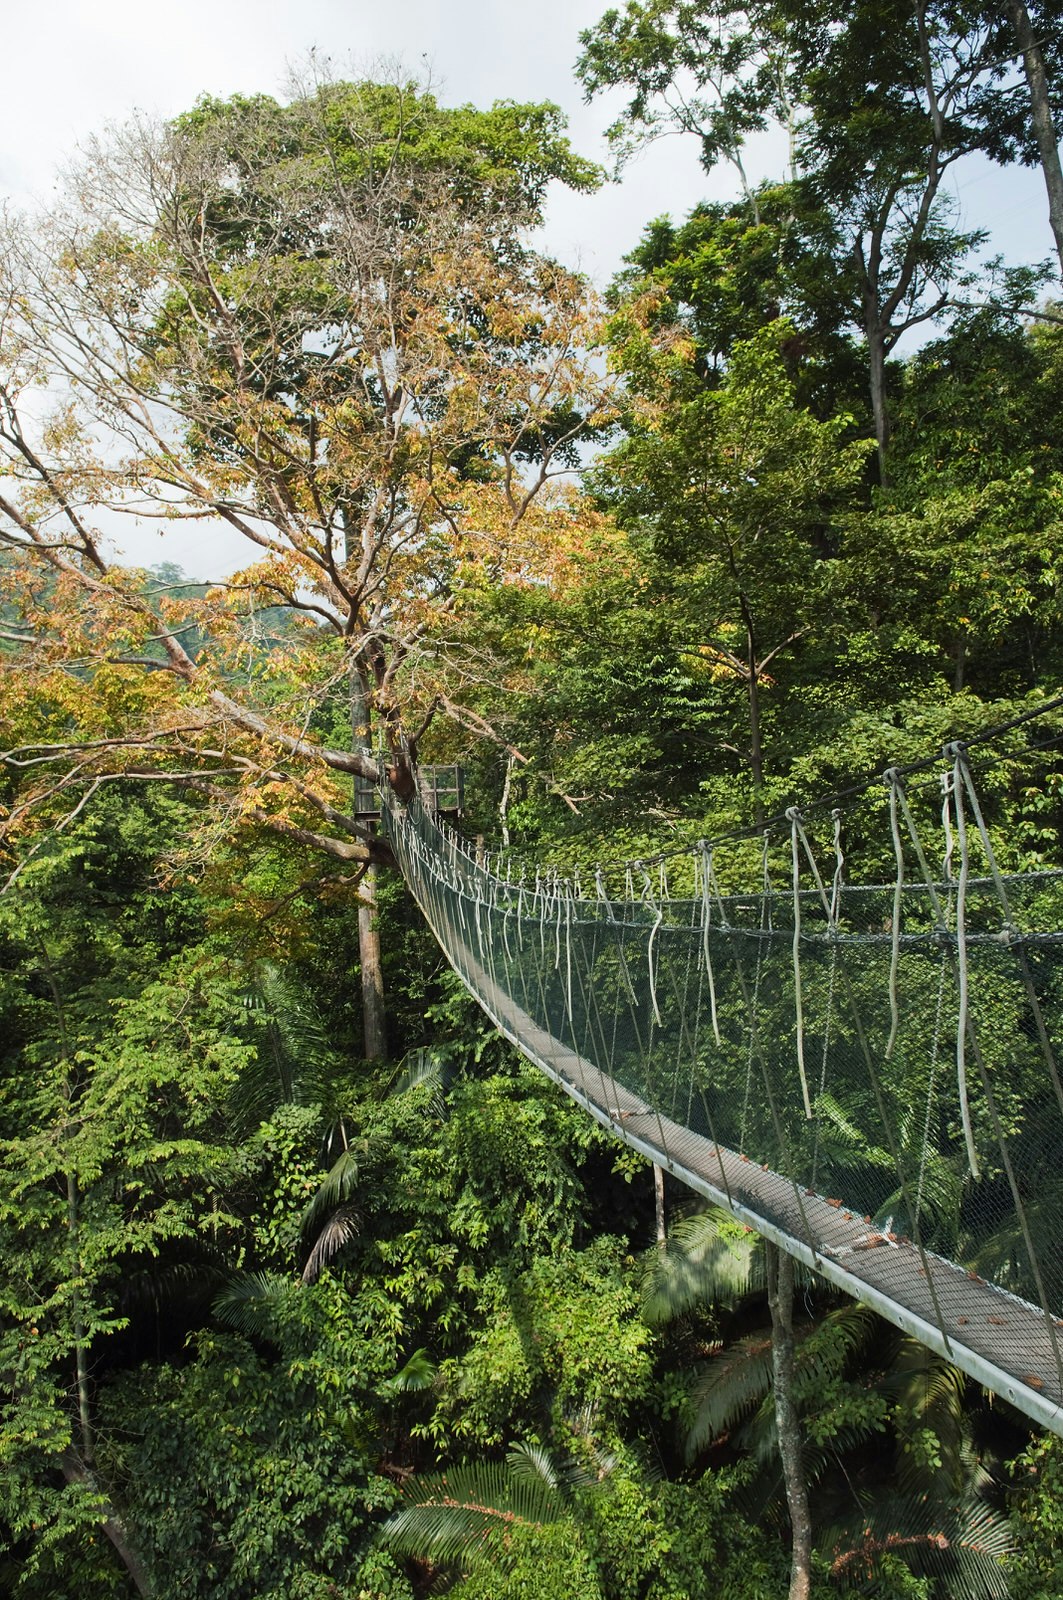 Canopy walkway in the rainforest, Forest Research Institute of Malaysia © Anders Blomqvist / Getty Images